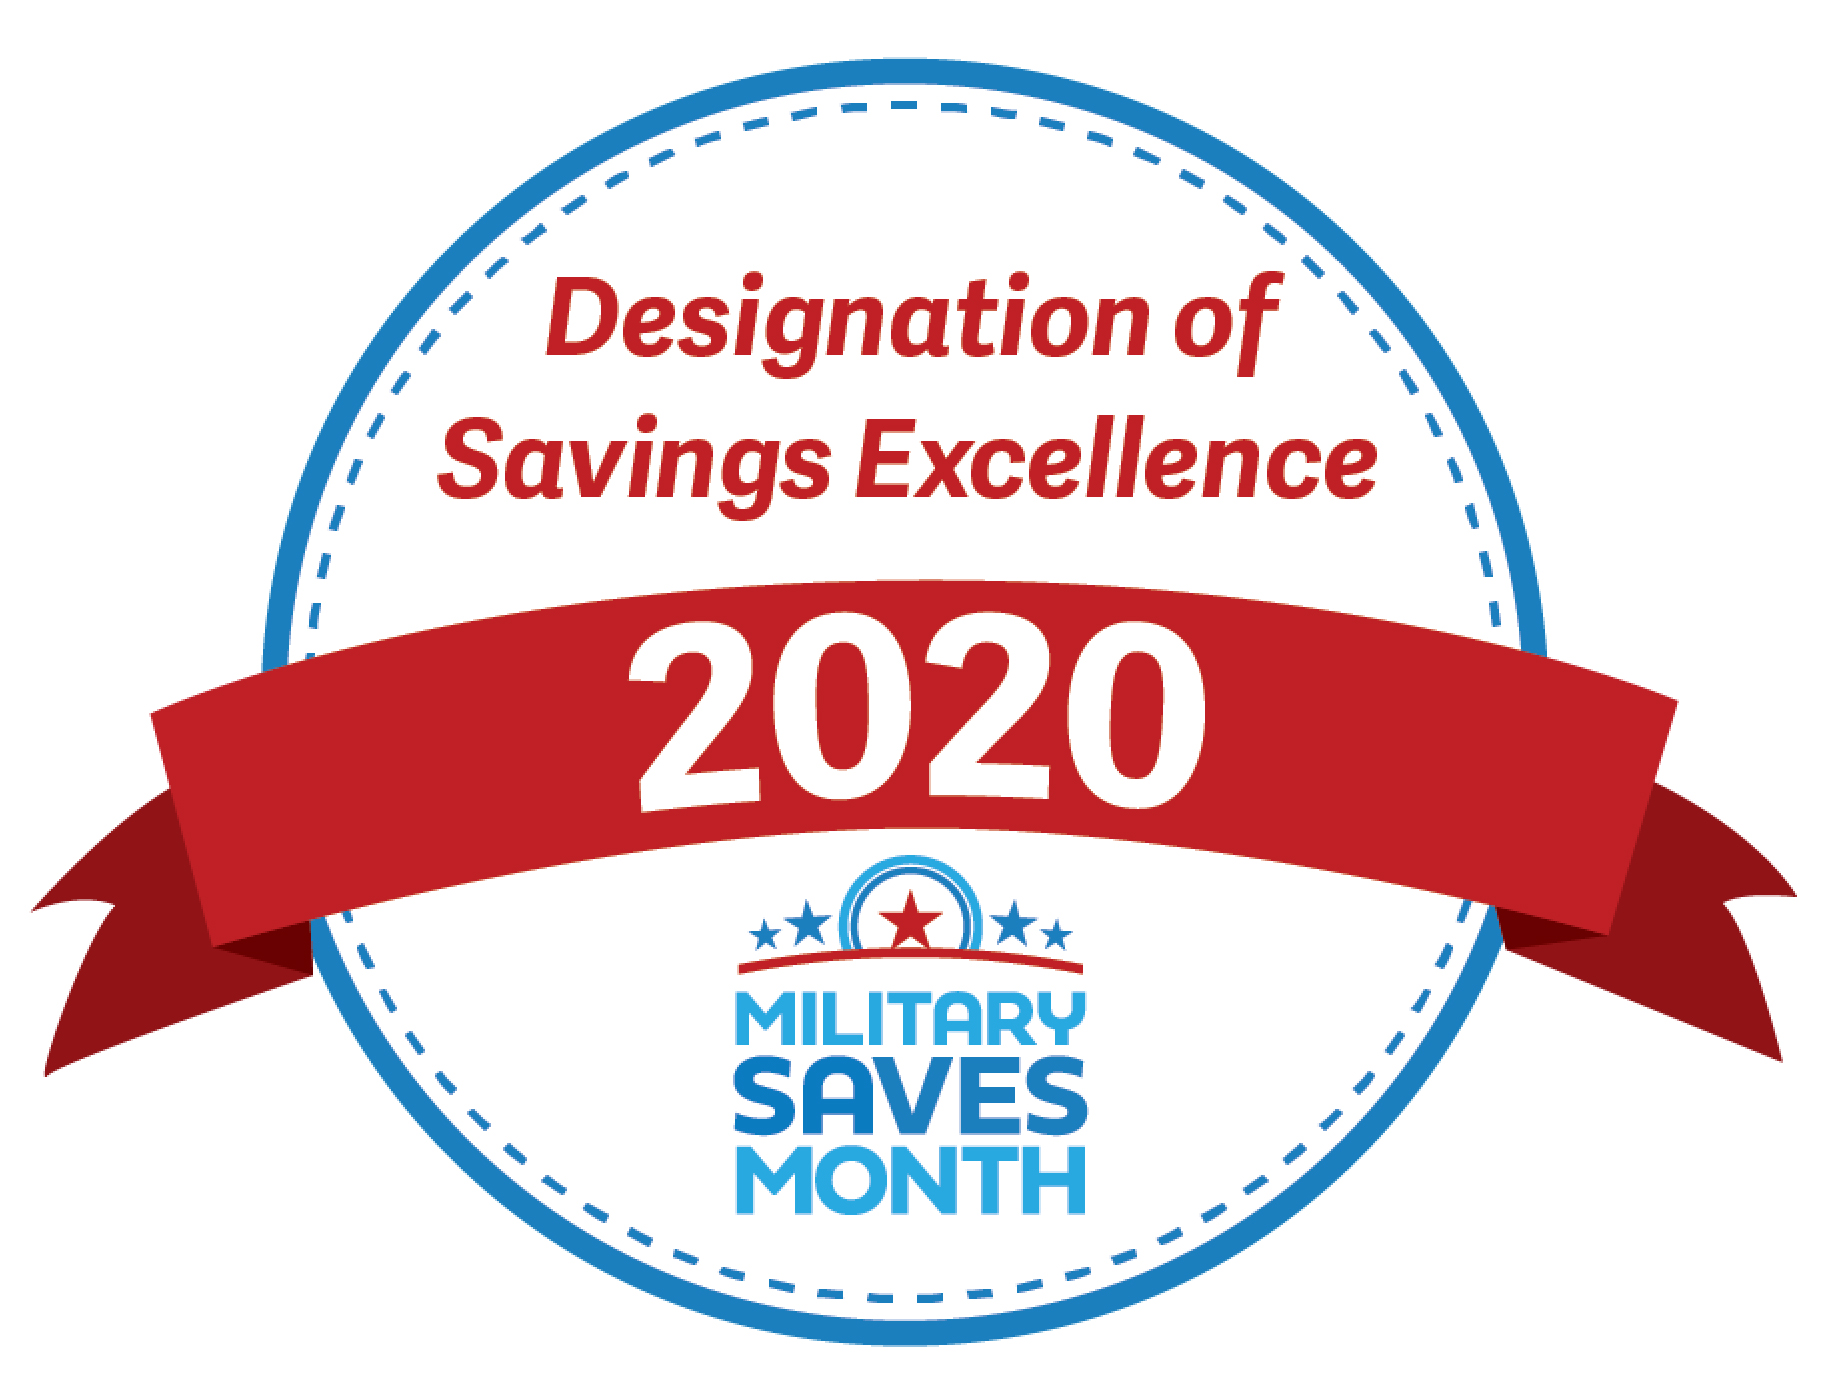 Armed Forces Bank also received the “Military Saves Designation of Savings Excellence” for its work to help service members and their families save money, reduce debt and build wealth